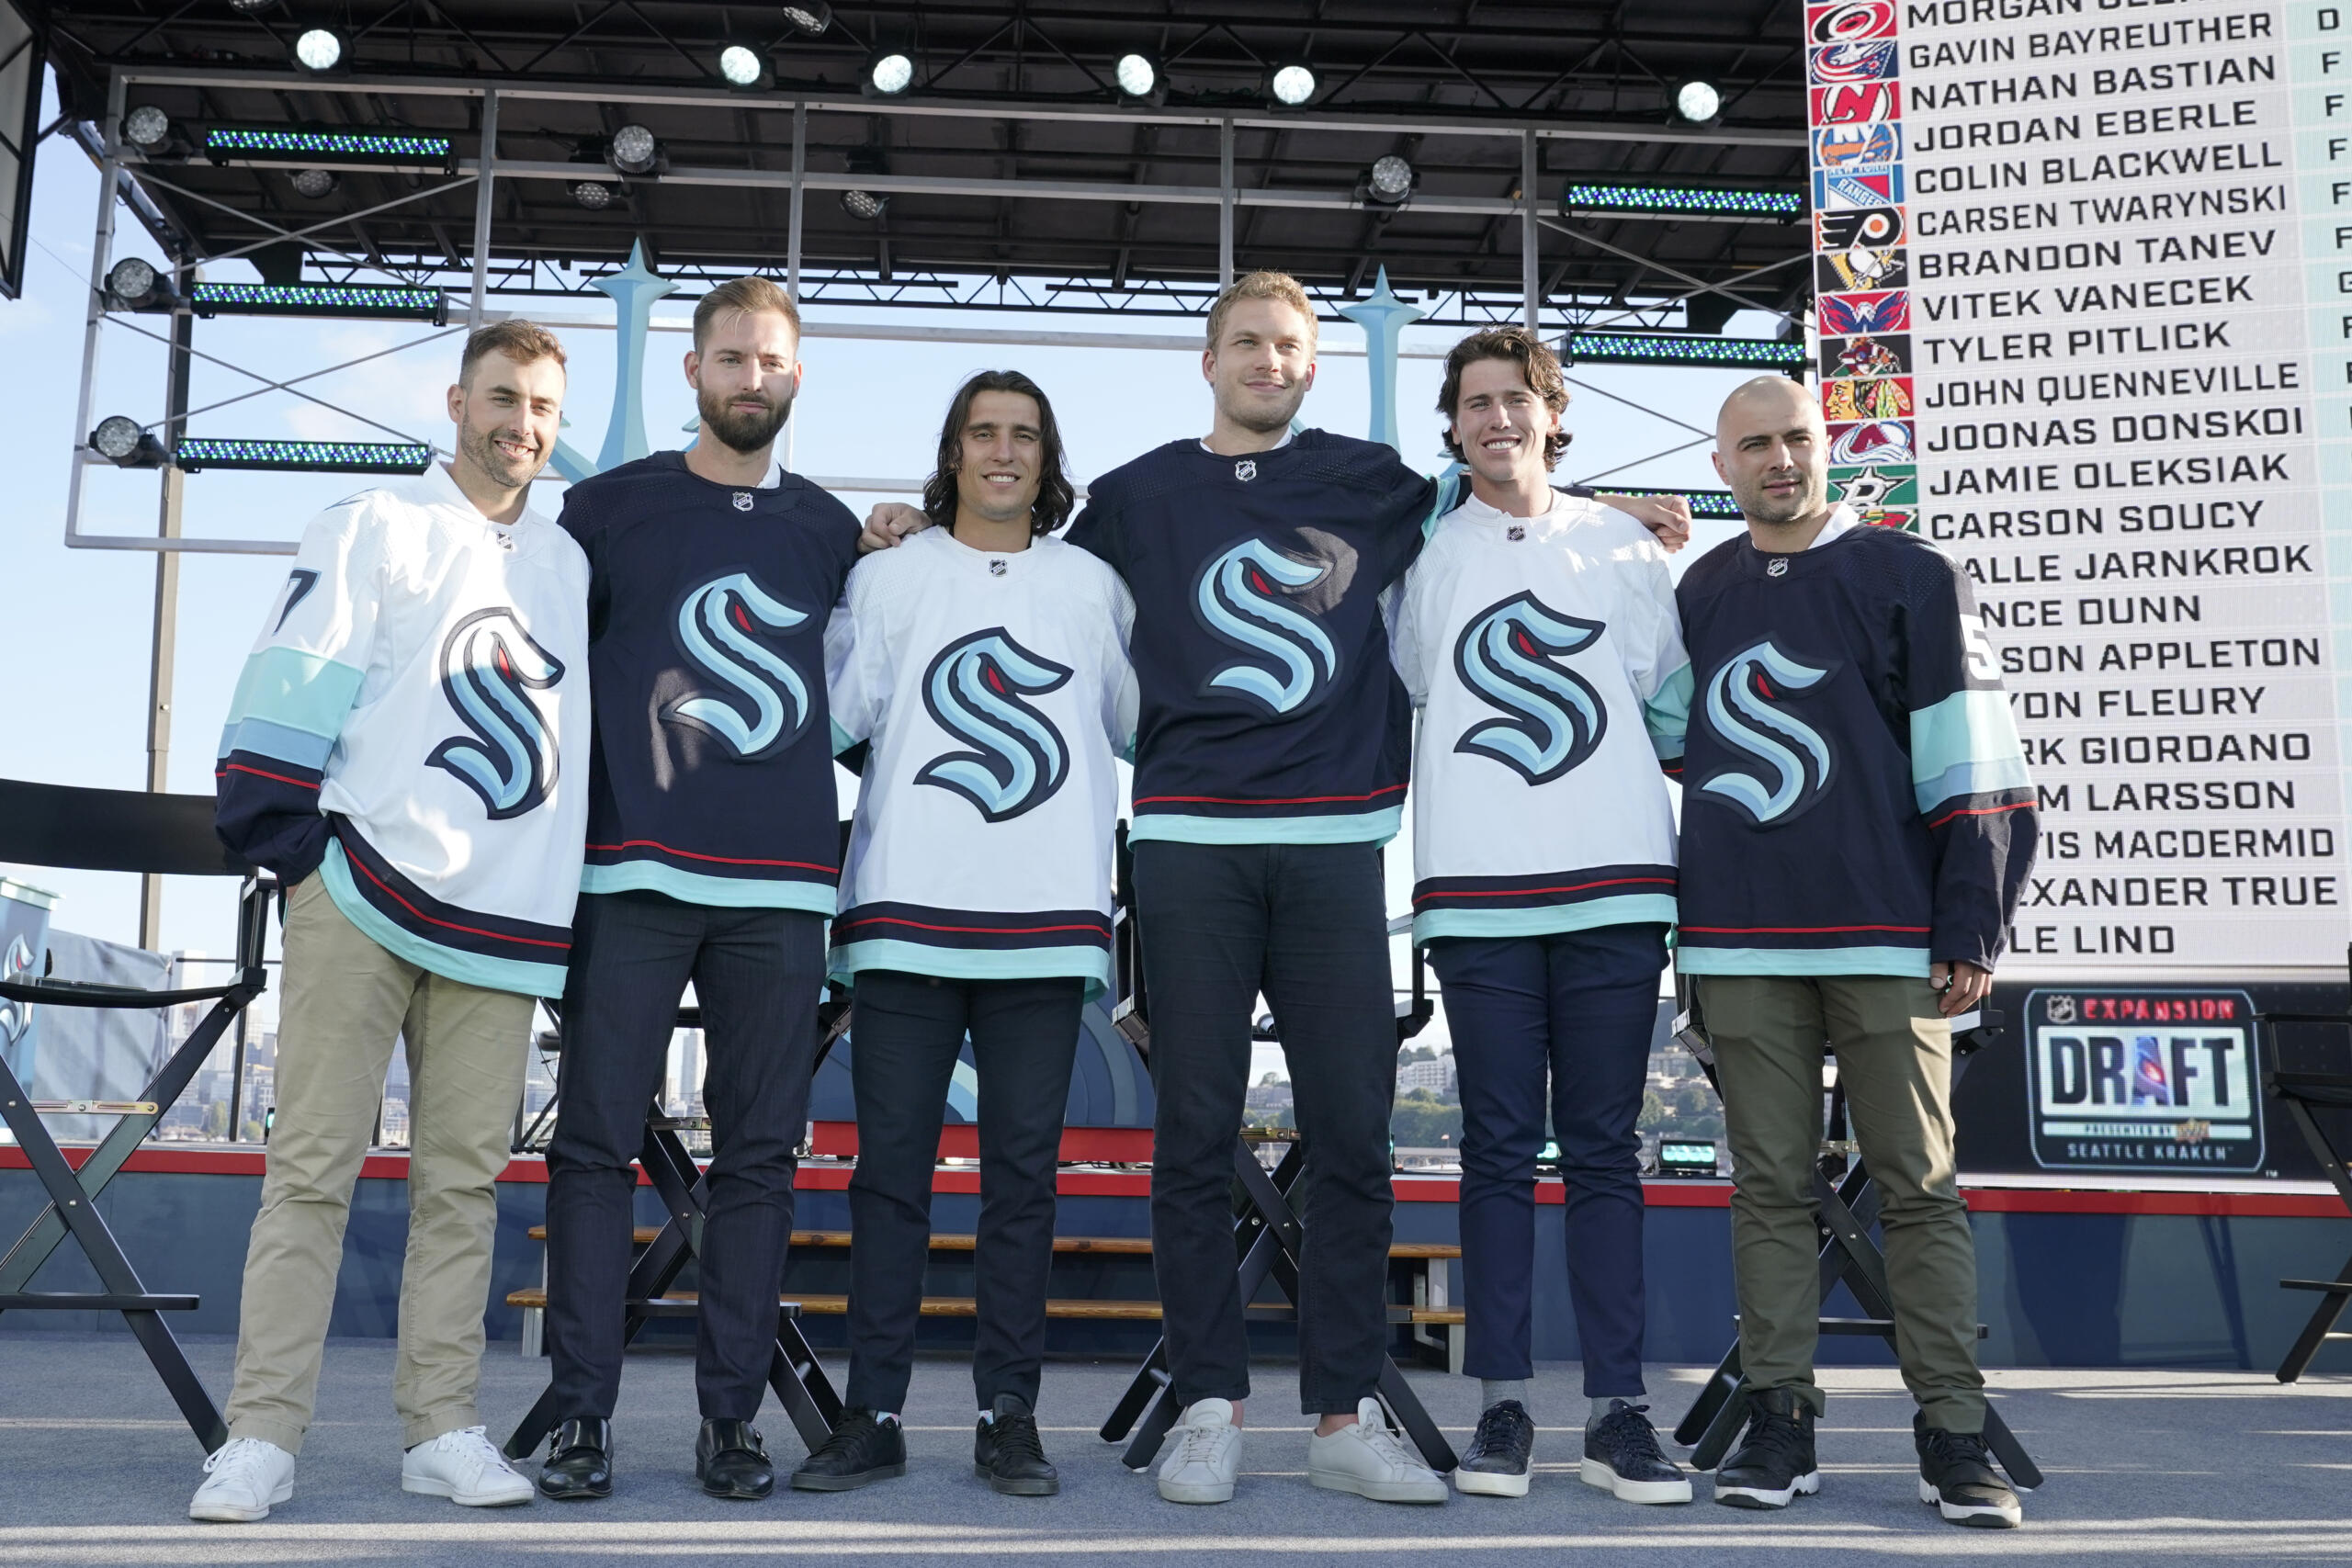 Seattle Kraken NHL hockey players Jordan Eberle, Chris Dreidger, Brandon Tanev, Jamie Oleksiak, Hadyn Fluery and Mark Giordano, from left, pose for a photo Wednesday, July 21, 2021, after being introduced during the Kraken's expansion draft event in Seattle. (AP Photo/Ted S.